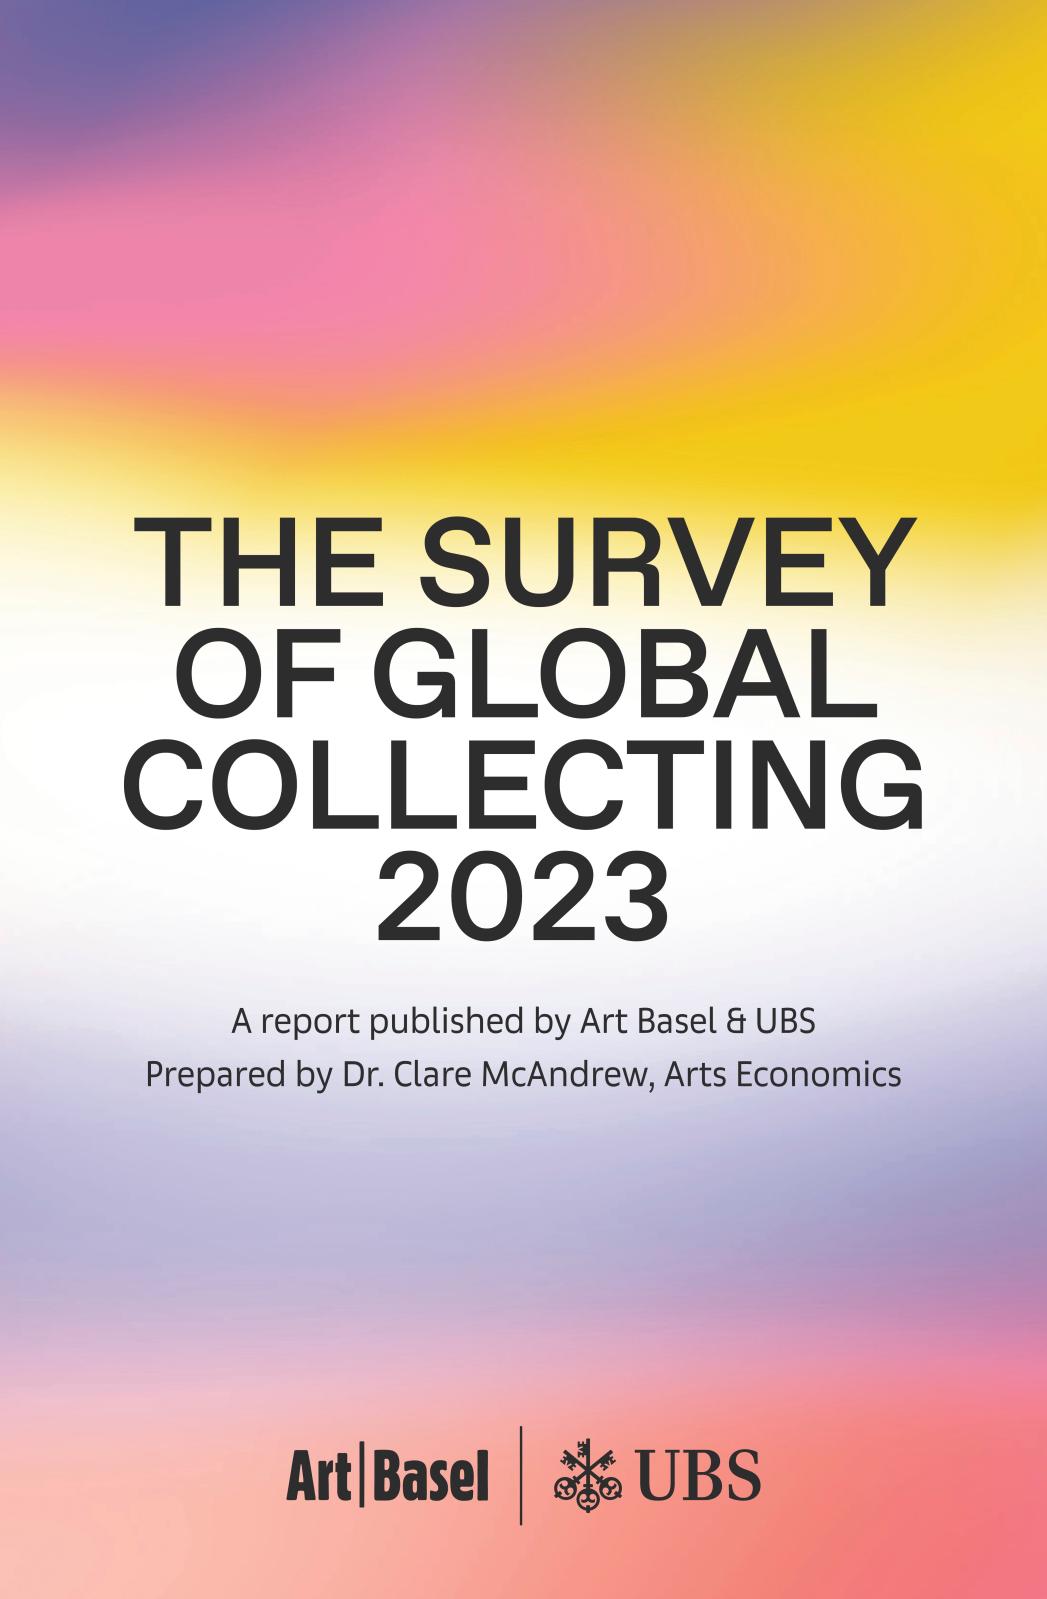  The Survey of Global Collecting 2023 : des collectionneurs plus prudents